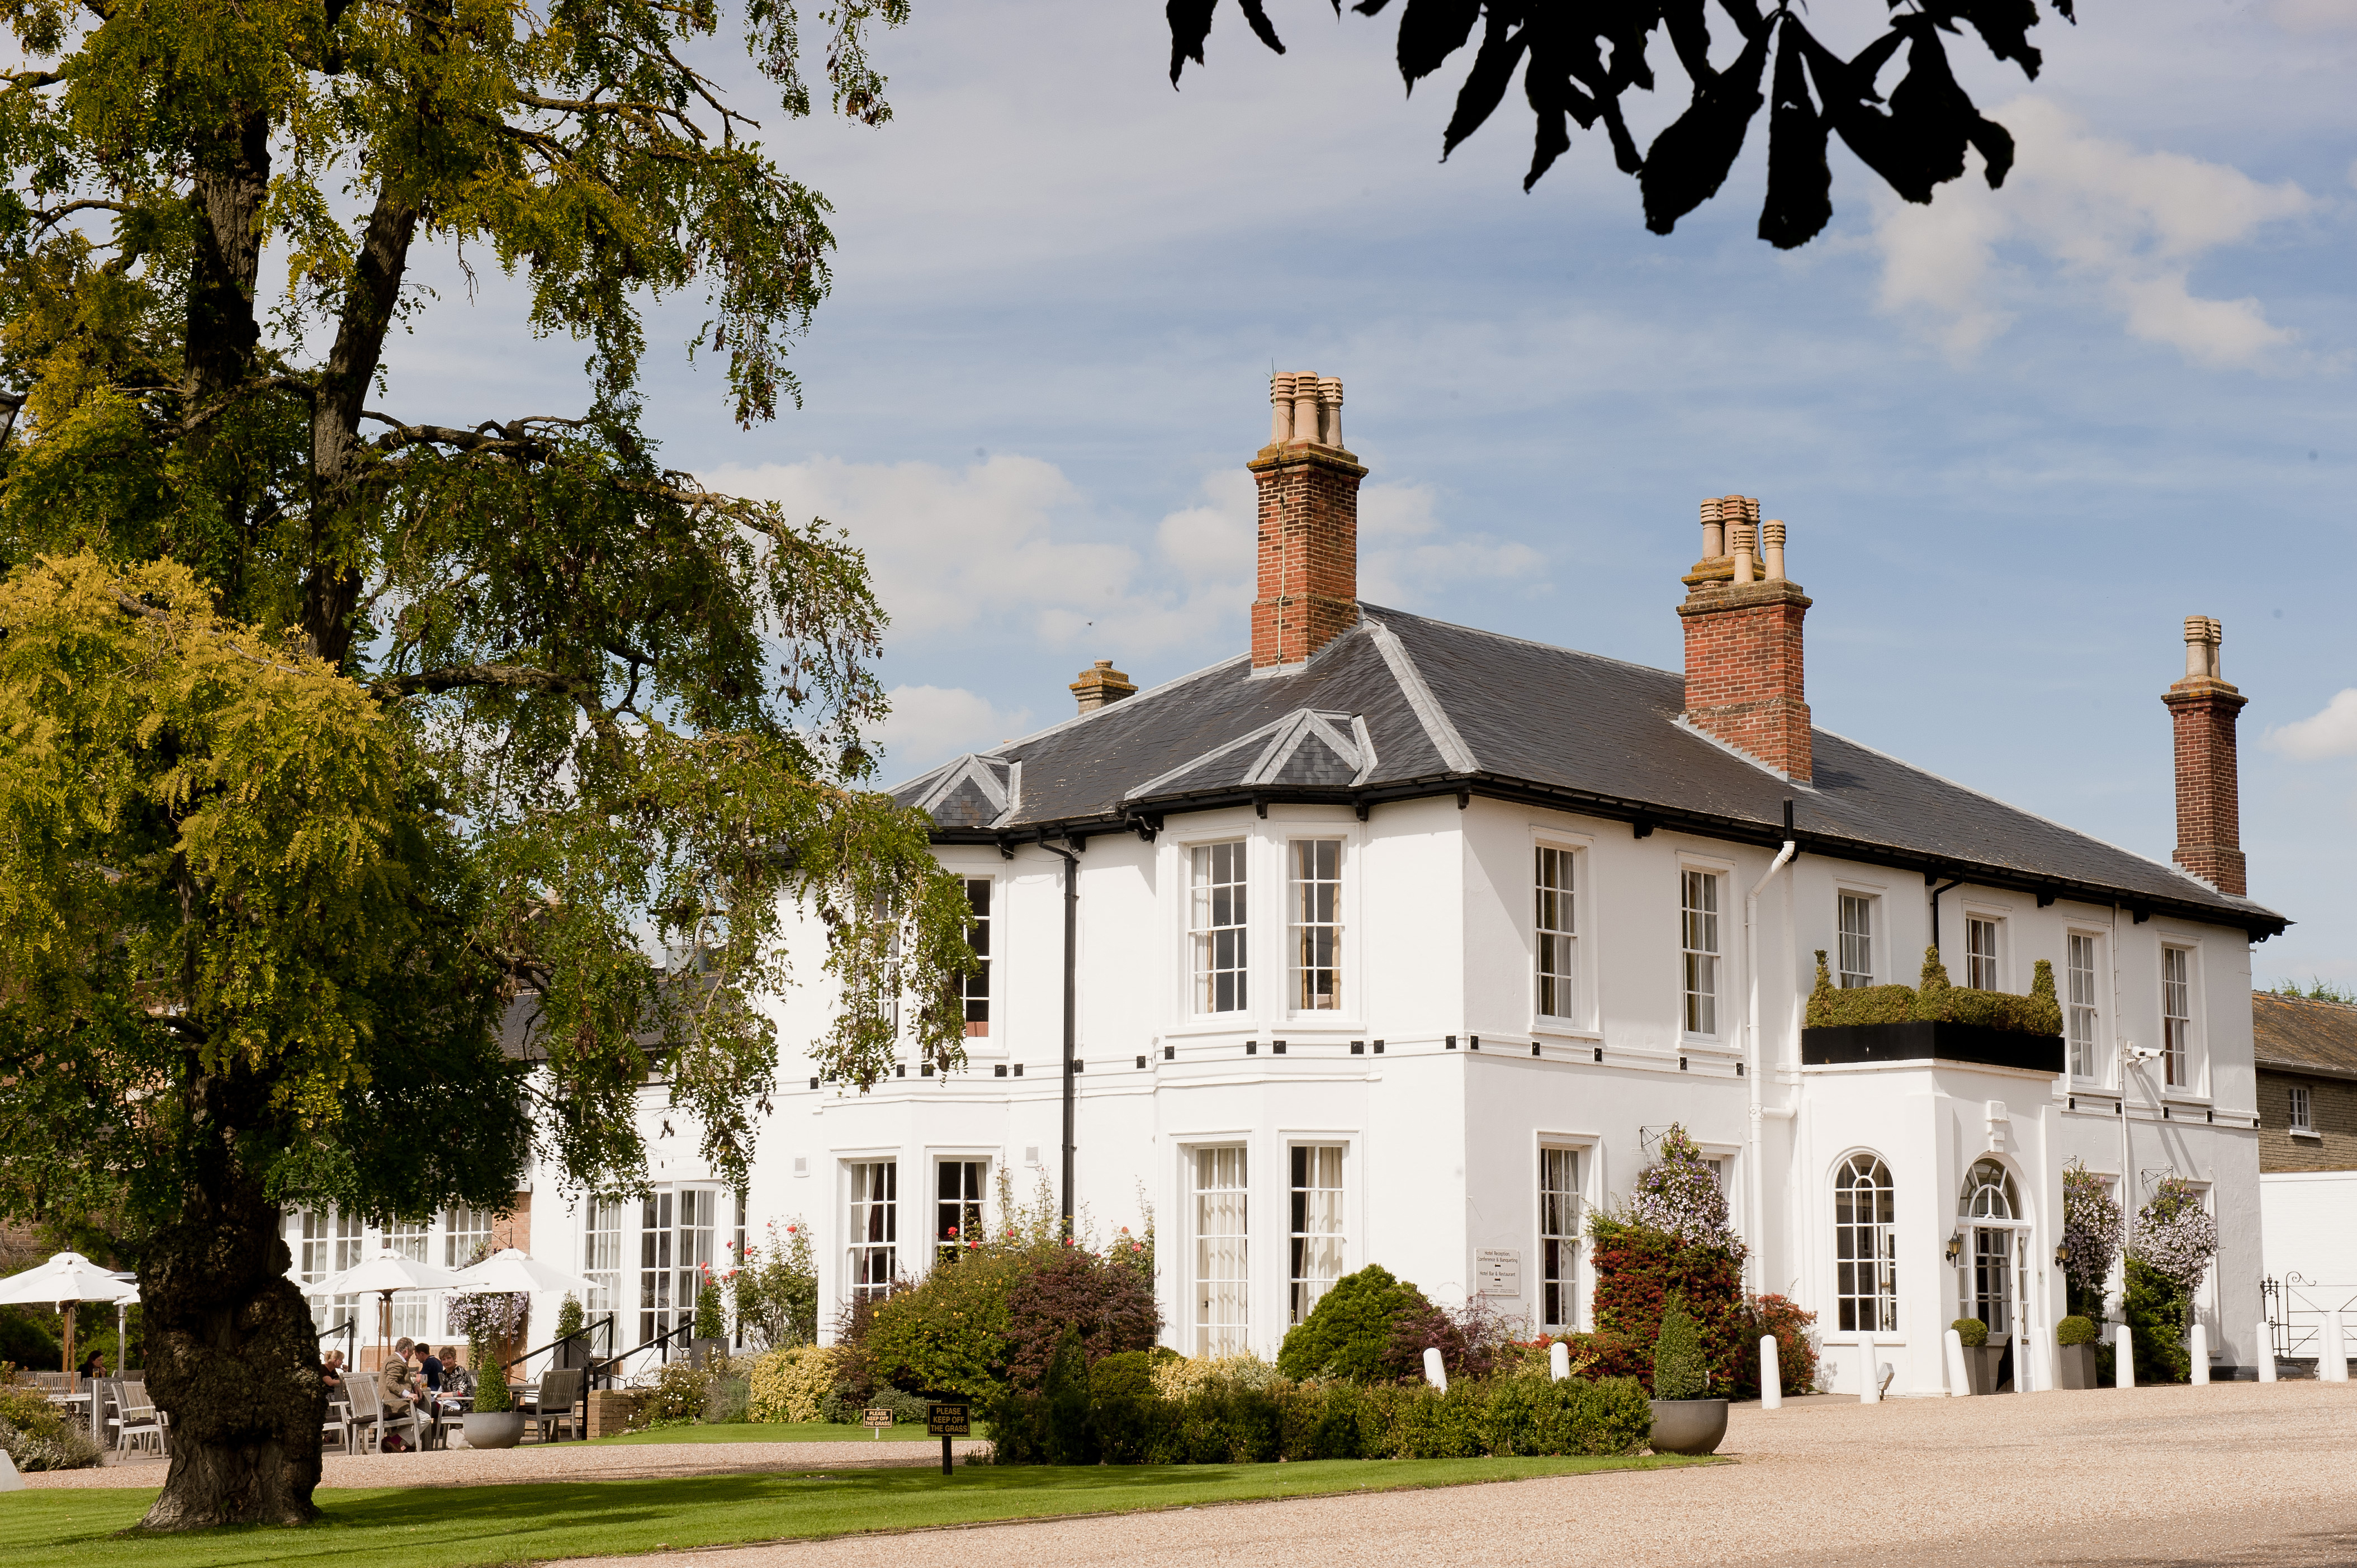 Bedford Lodge Hotel & Spa Investing More Than £3,000 Installing a New Bespoke Music System